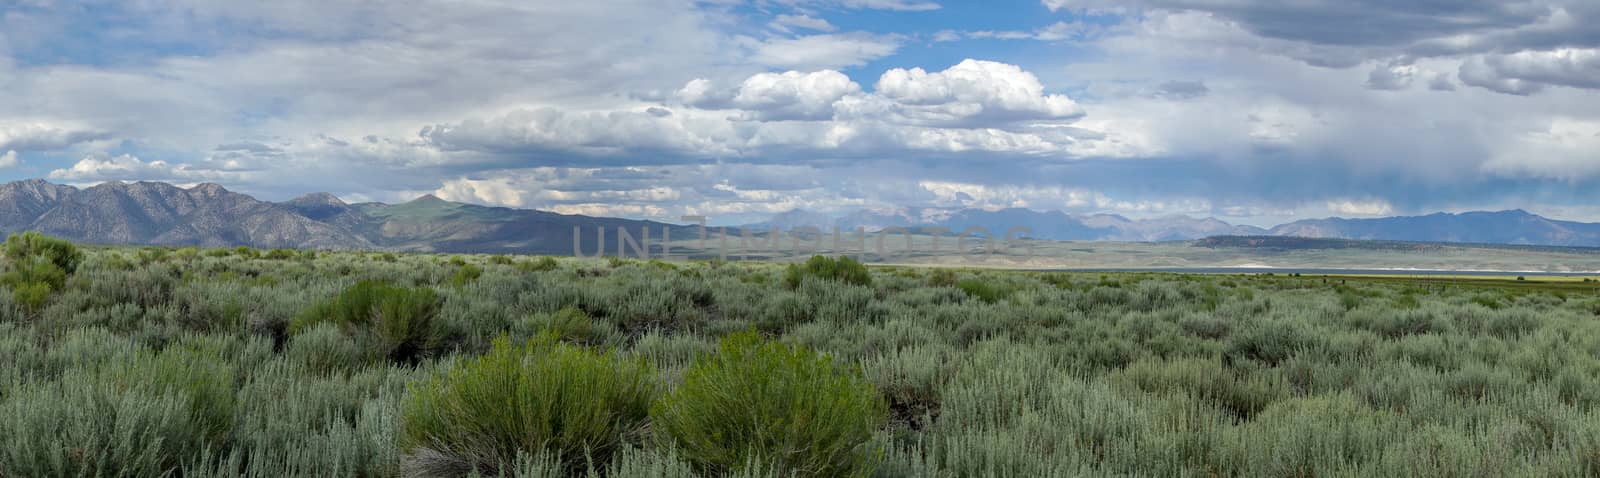 Green wild land with sagebrush plant and mountain in the background next the Lake Crowley by Bonandbon